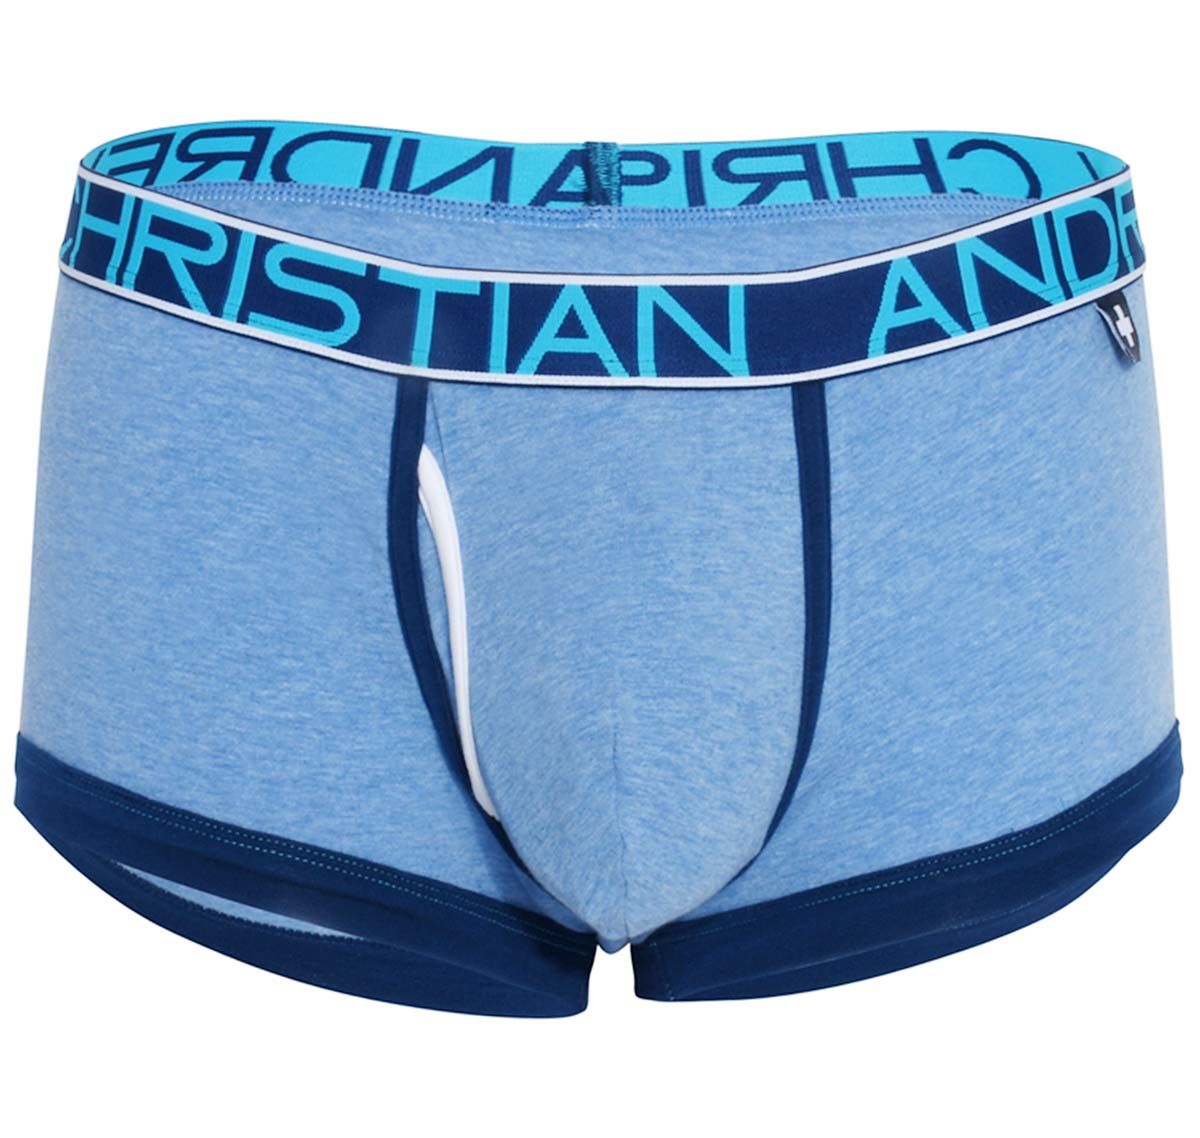 Andrew Christian Bóxer FLY TAGLESS BOXER w/ ALMOST NAKED 92363, azul